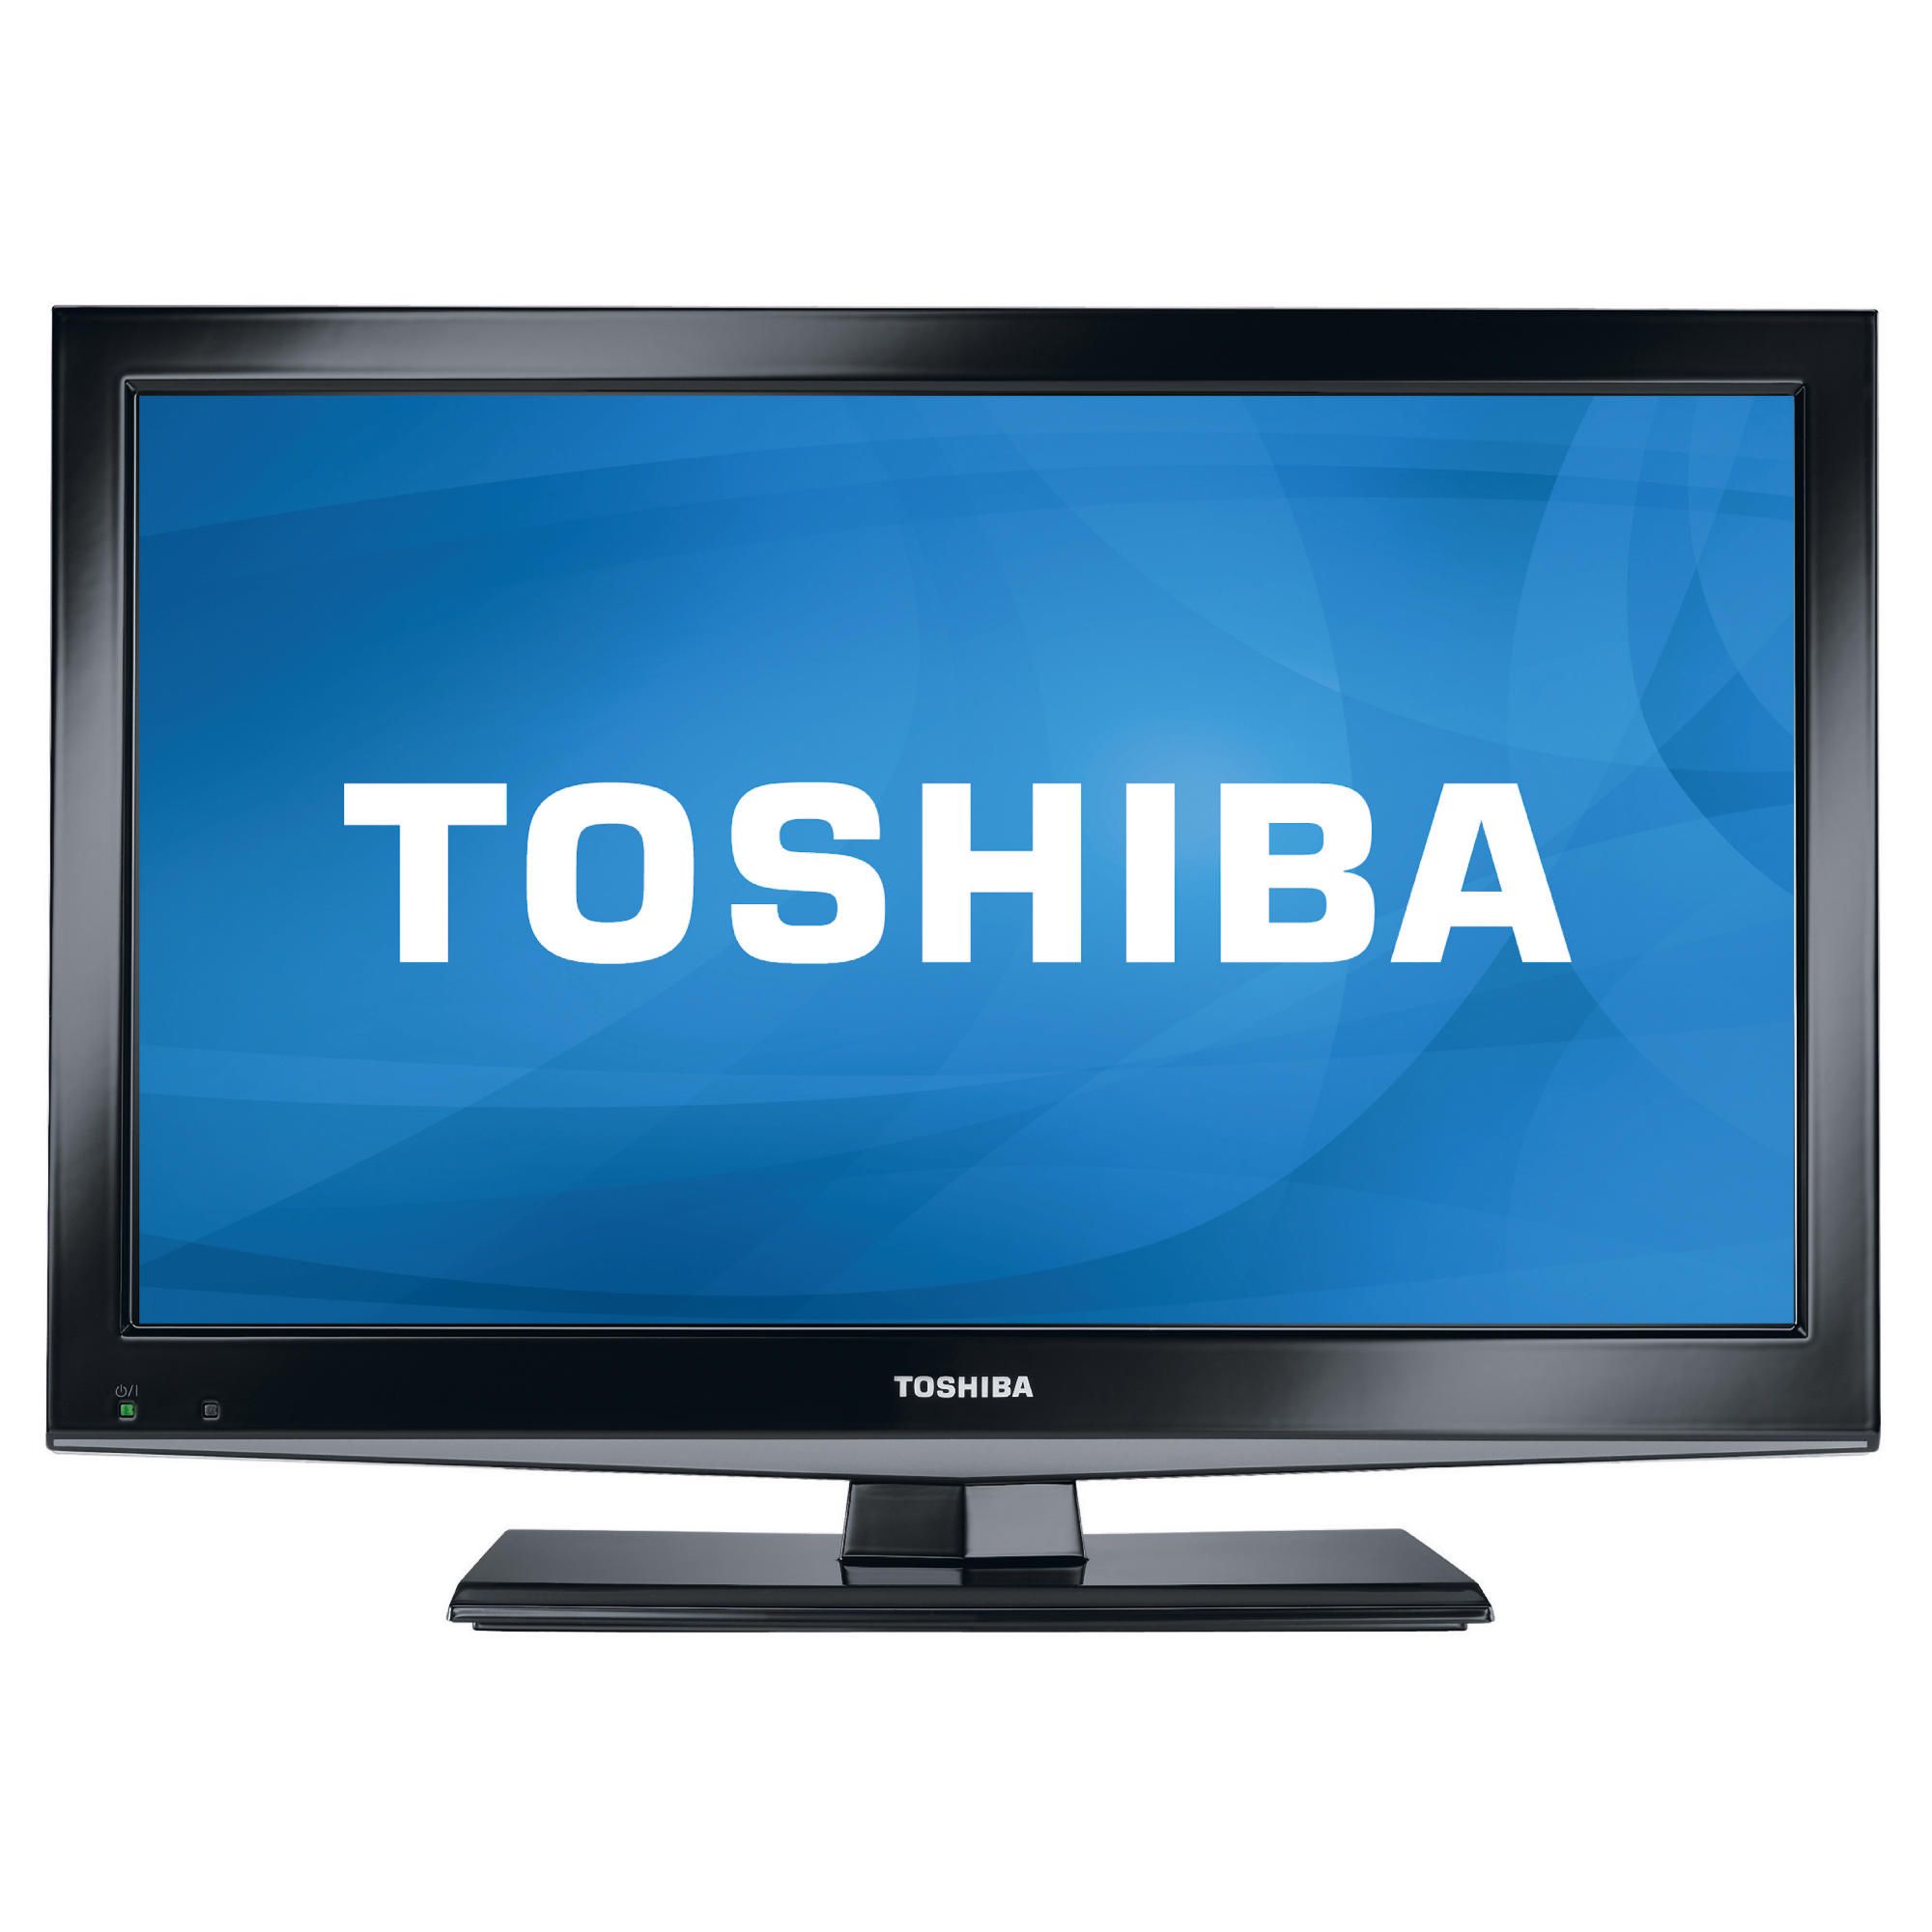 Toshiba 19DL502B 19 inch HD ready LED TV/DVD combi with Freeview